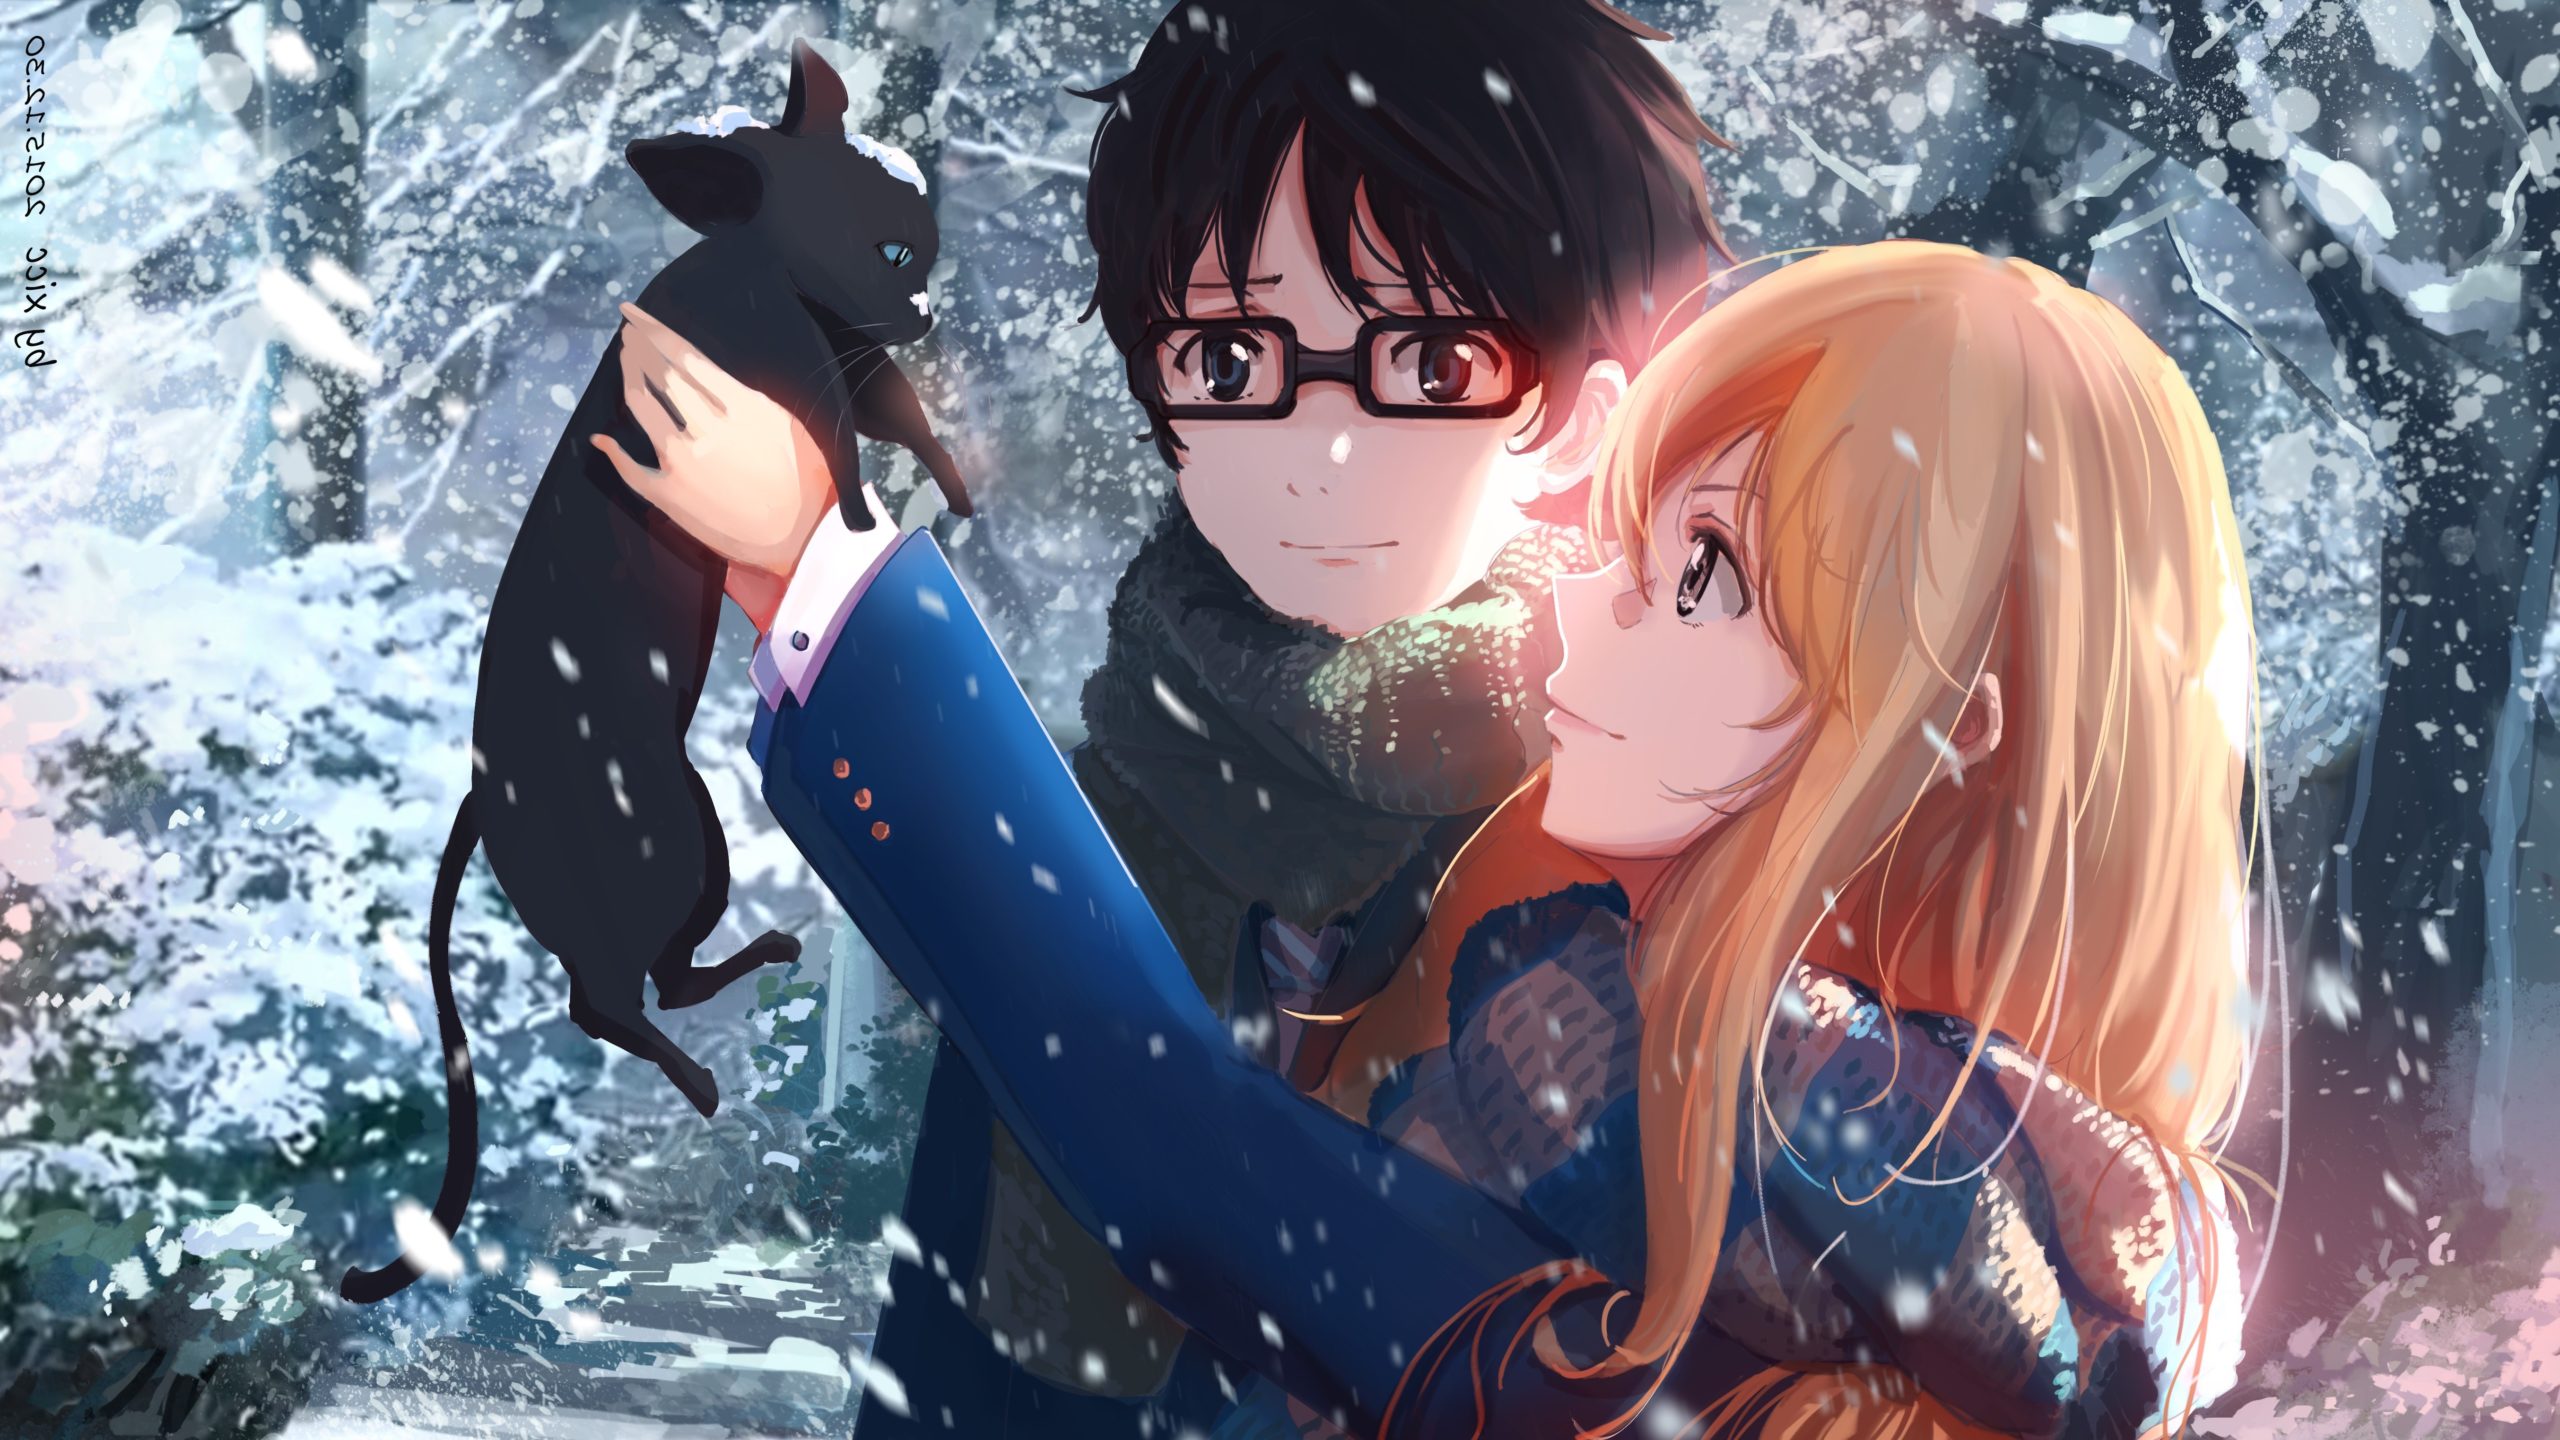 Shigatsu Wa Kimi No Uso Ep 12 Shigatsu wa Kimi no Uso streaming